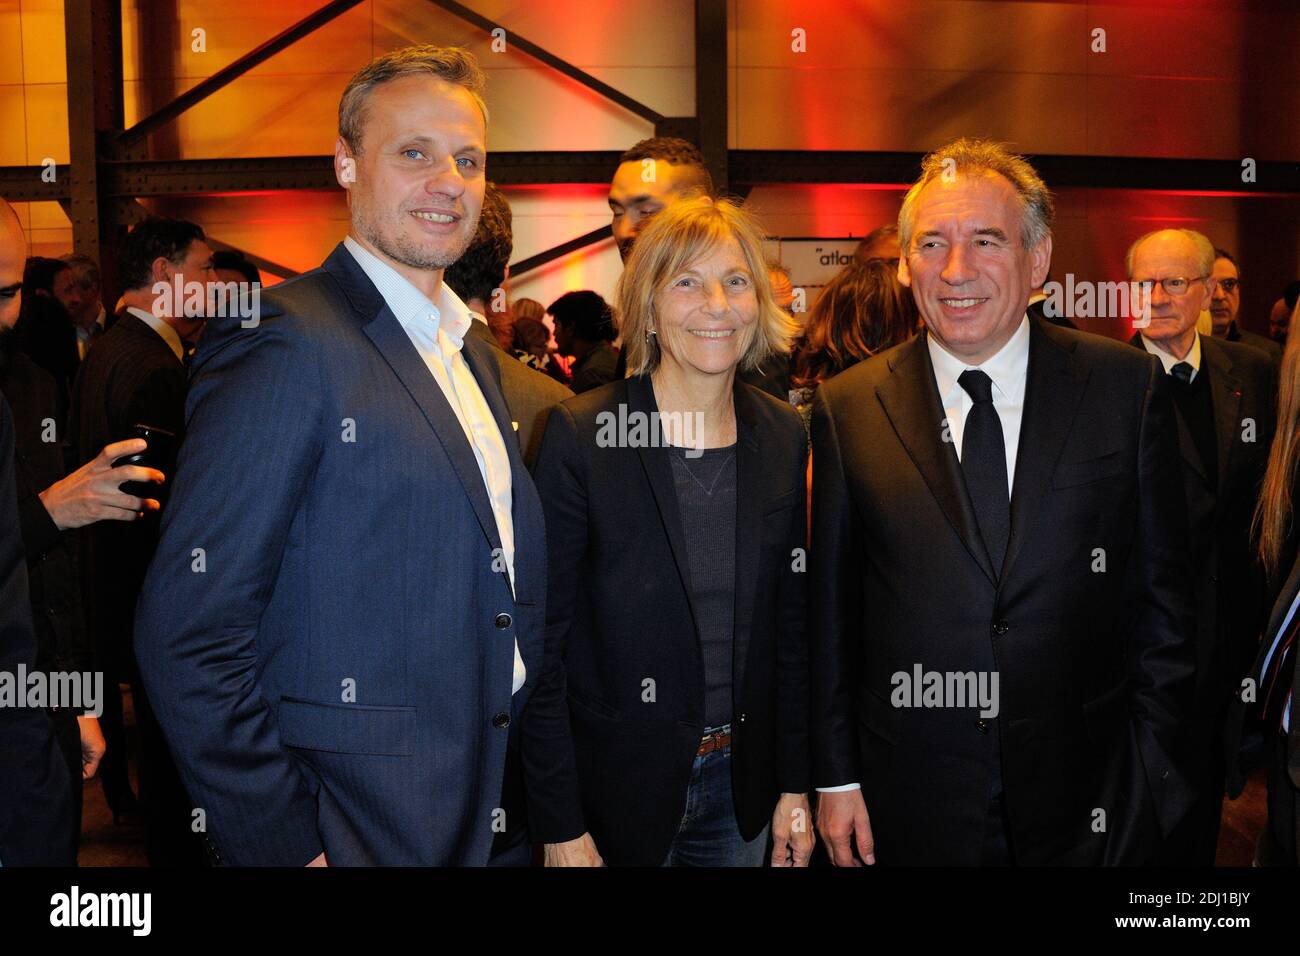 Marielle de Sarnez, Francois Bayrou, Jean-Sebastien Ferjou attending the  Atlantico 5th Anniversary at Cafe Campana at Musee d'Orsay in Paris,  France, on May 24, 2016. Photo by Alban Wyters/ABACAPRESS.COM Stock Photo -